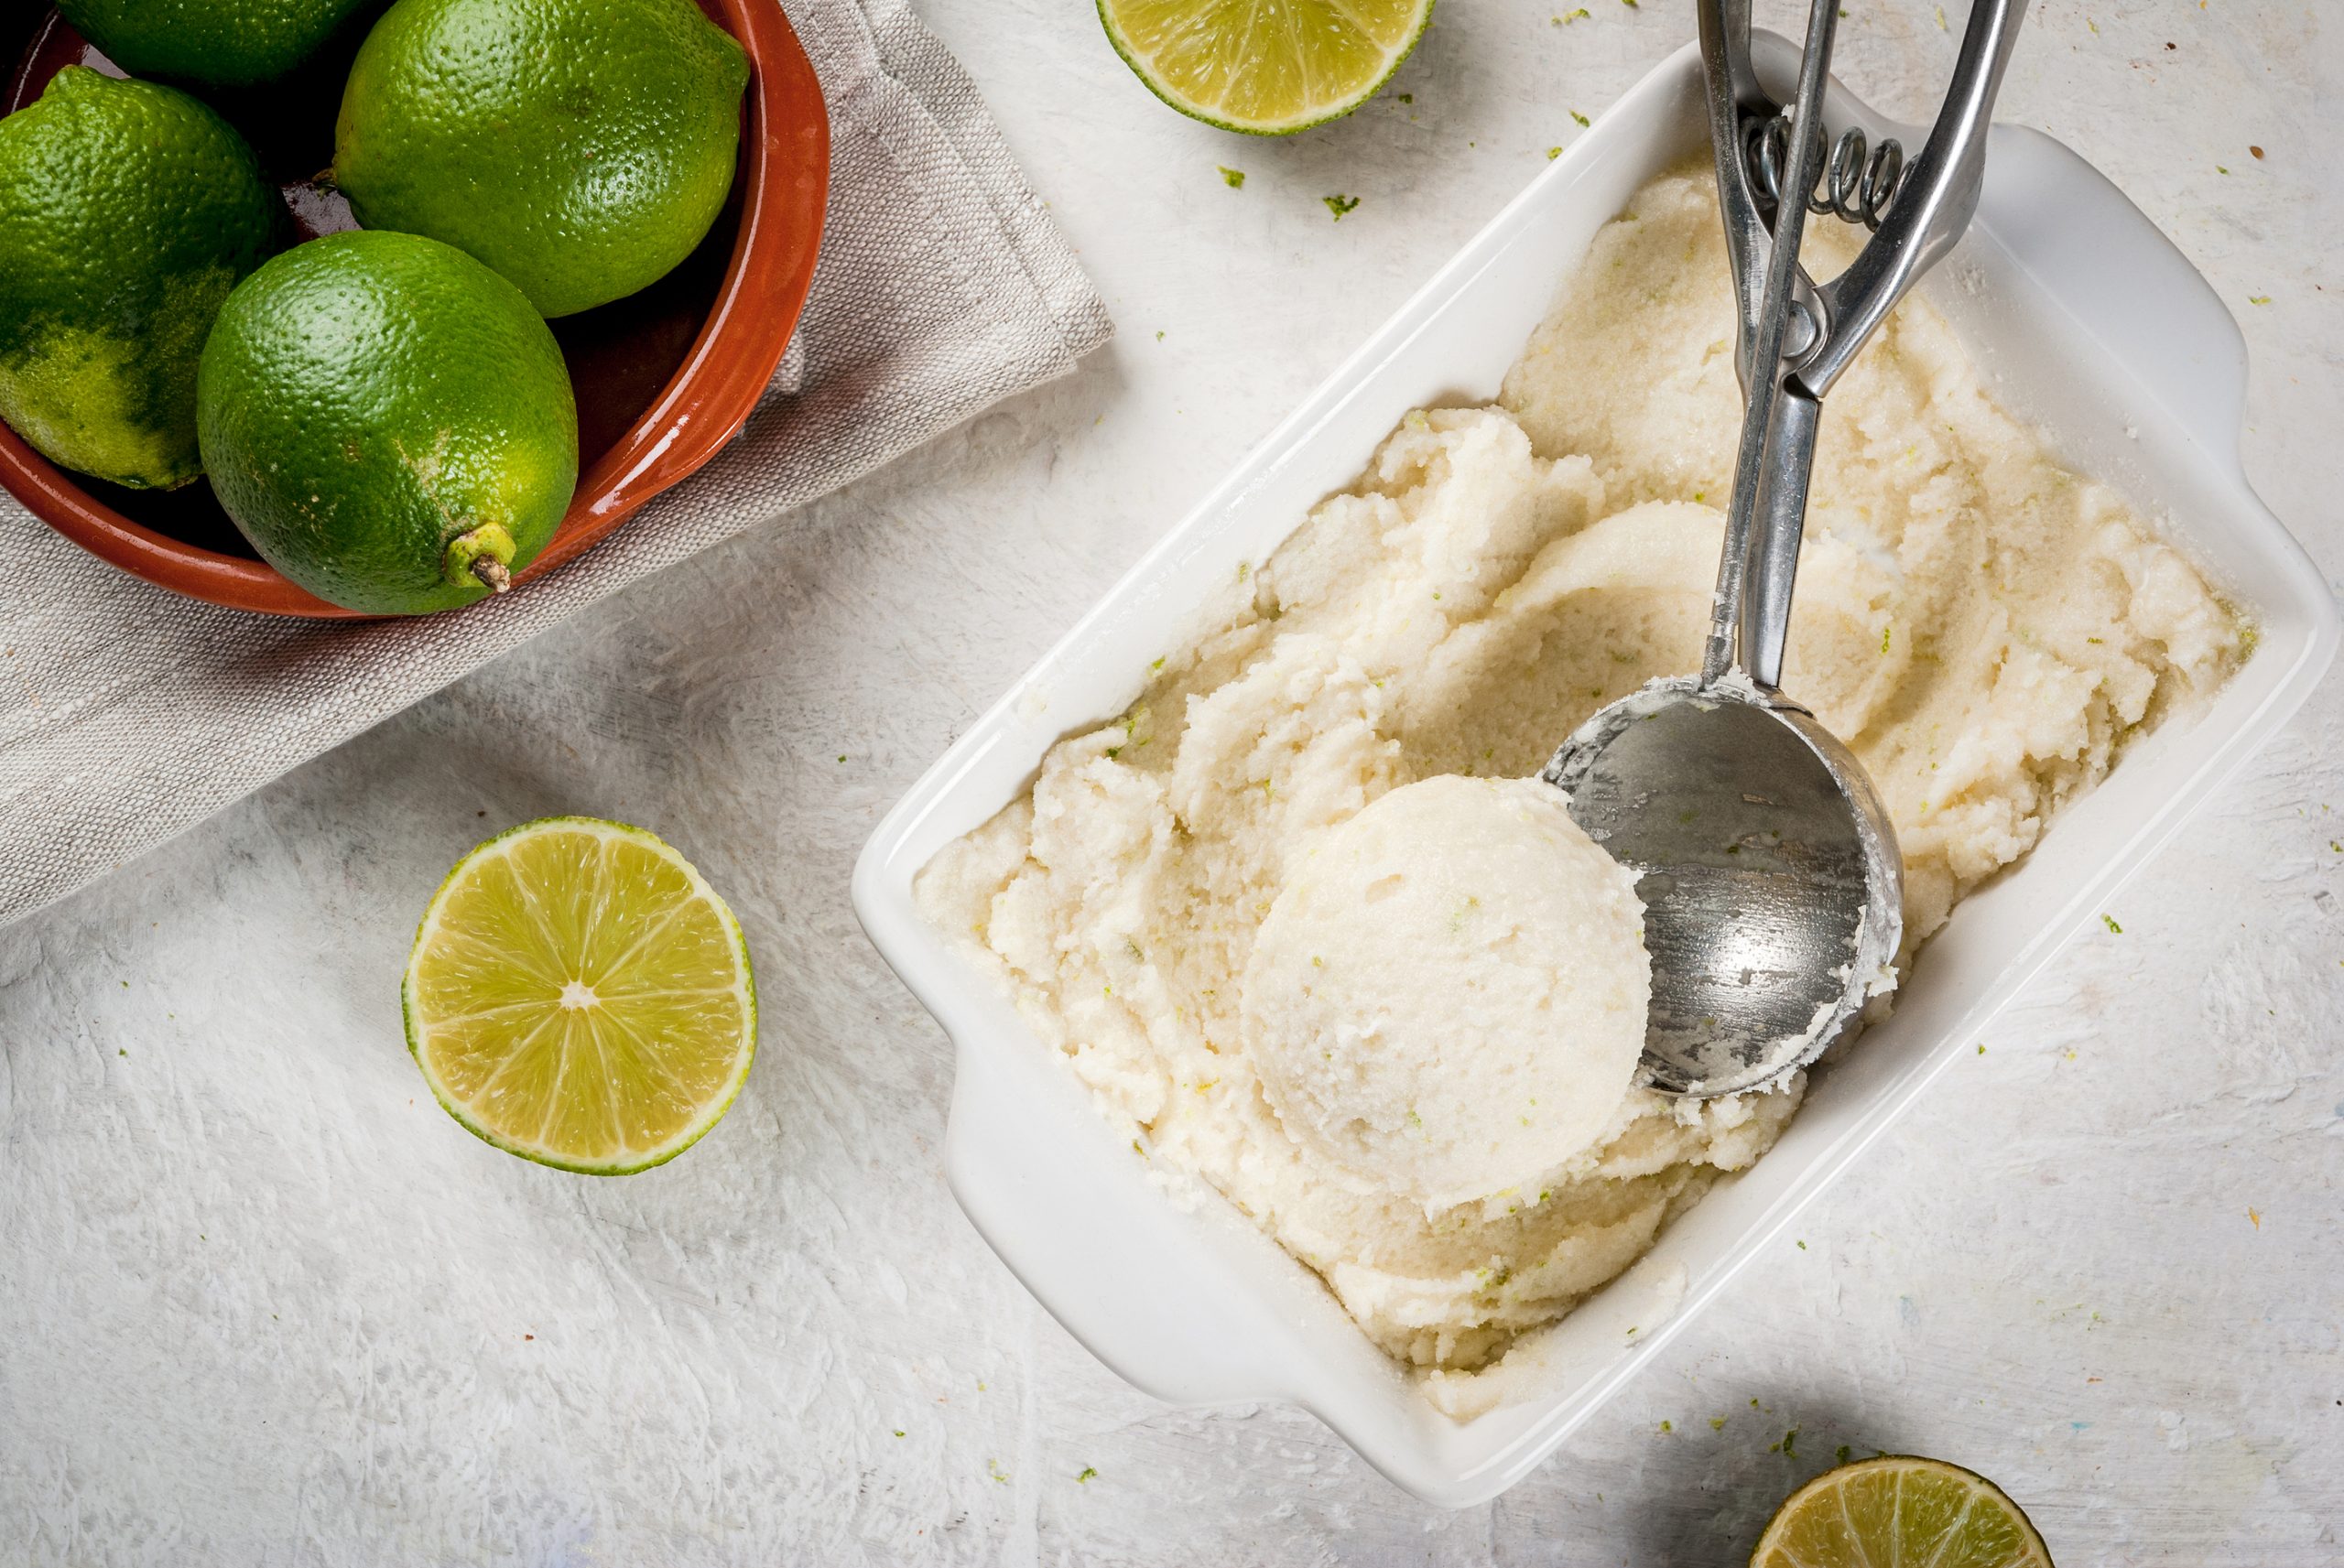 [RECIPE] Enjoy this SF key lime ice cream for dessert or in a smoothie